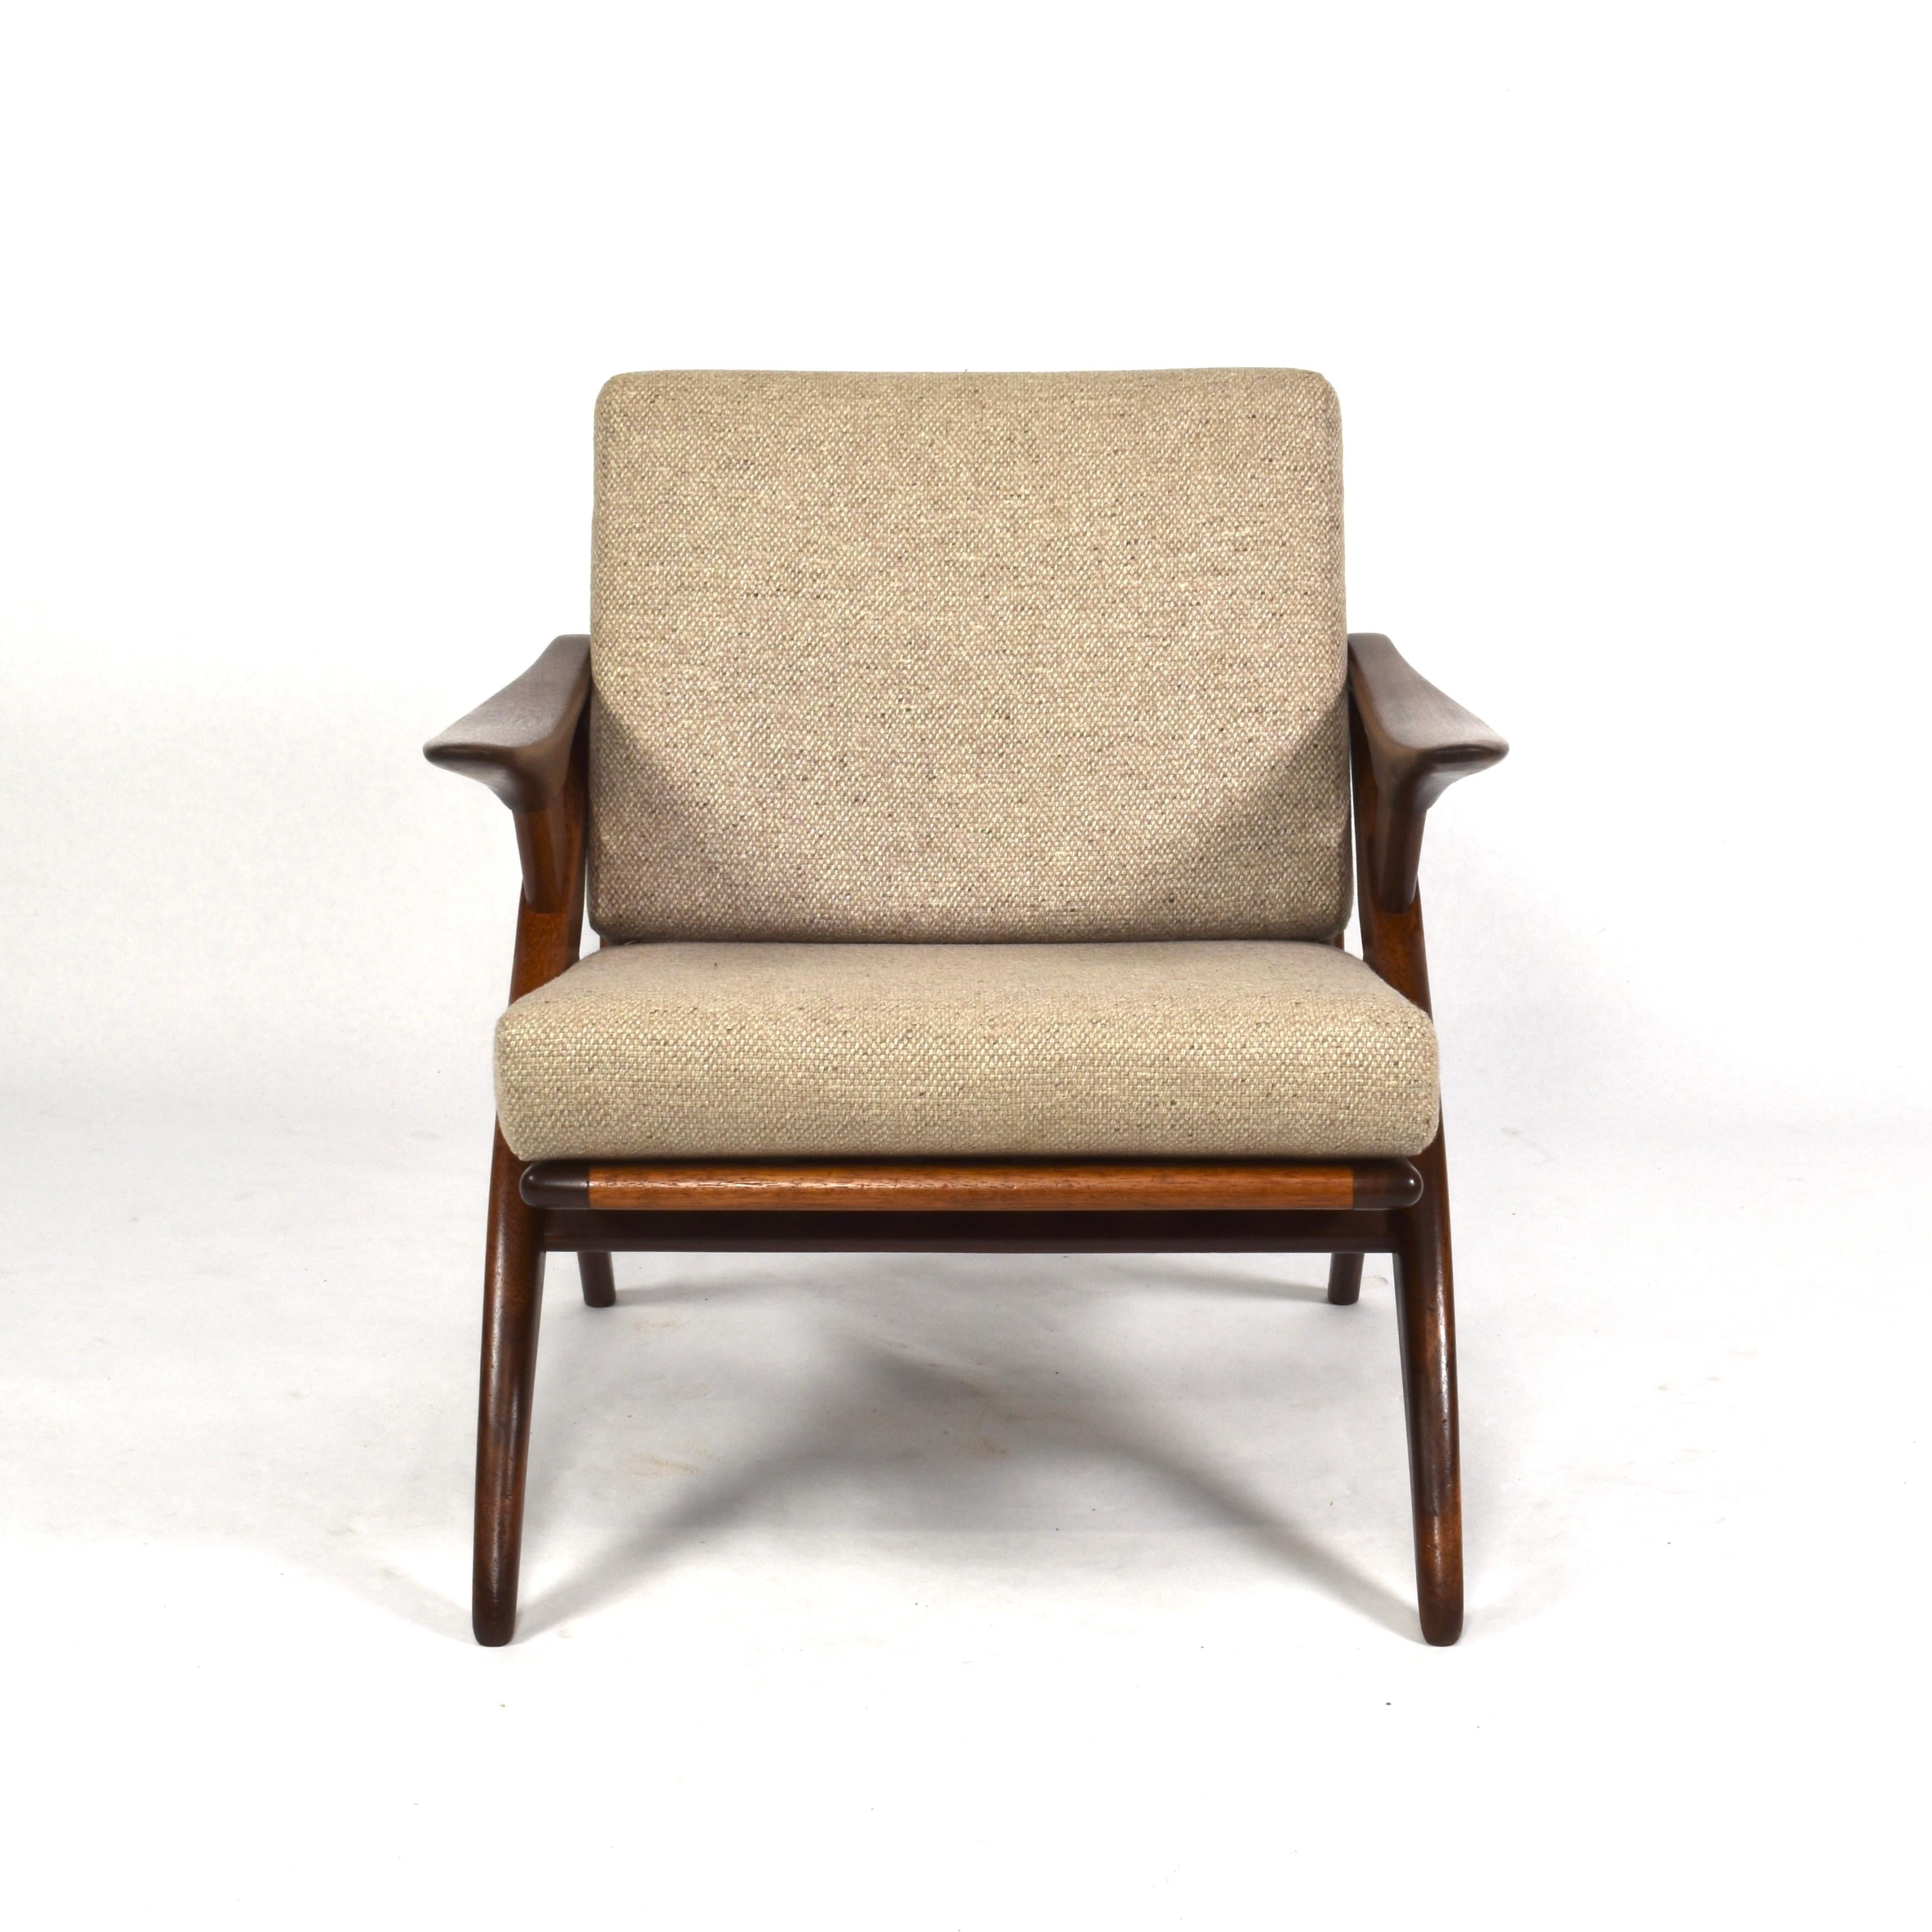 Organically shaped teak lounge chair by De Ster Gelderland, Netherlands, circa 1960. The chair still has it’s original fabric. The seat support straps have been replaced by new rubber straps. The finish on the wood still looks